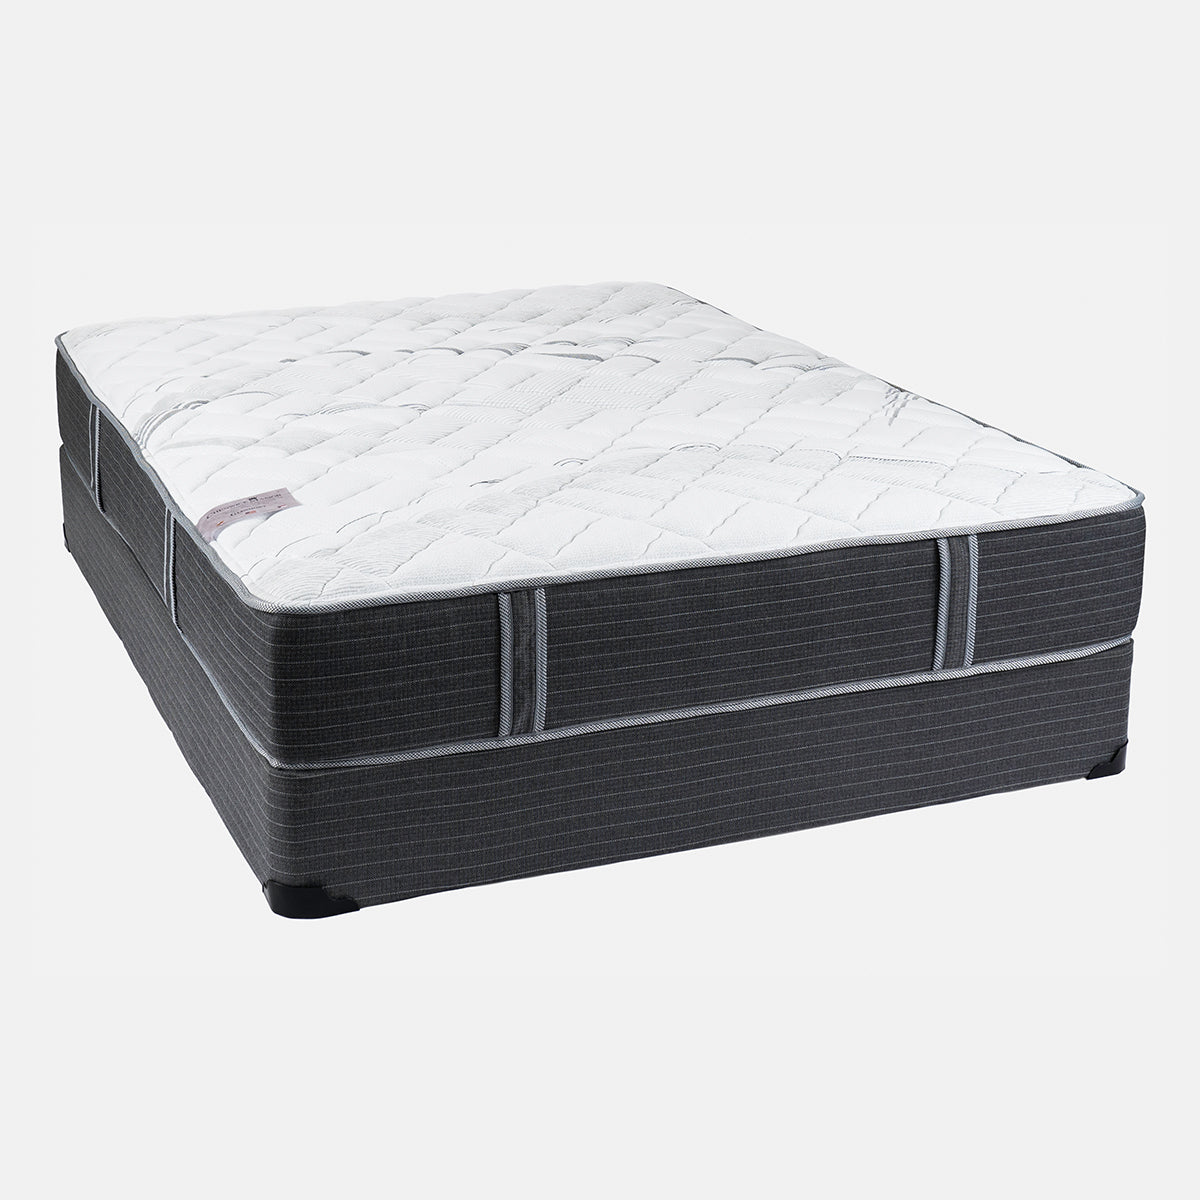 Cheswick Manor Glenmont Firm Mattress On Box Spring Angle View